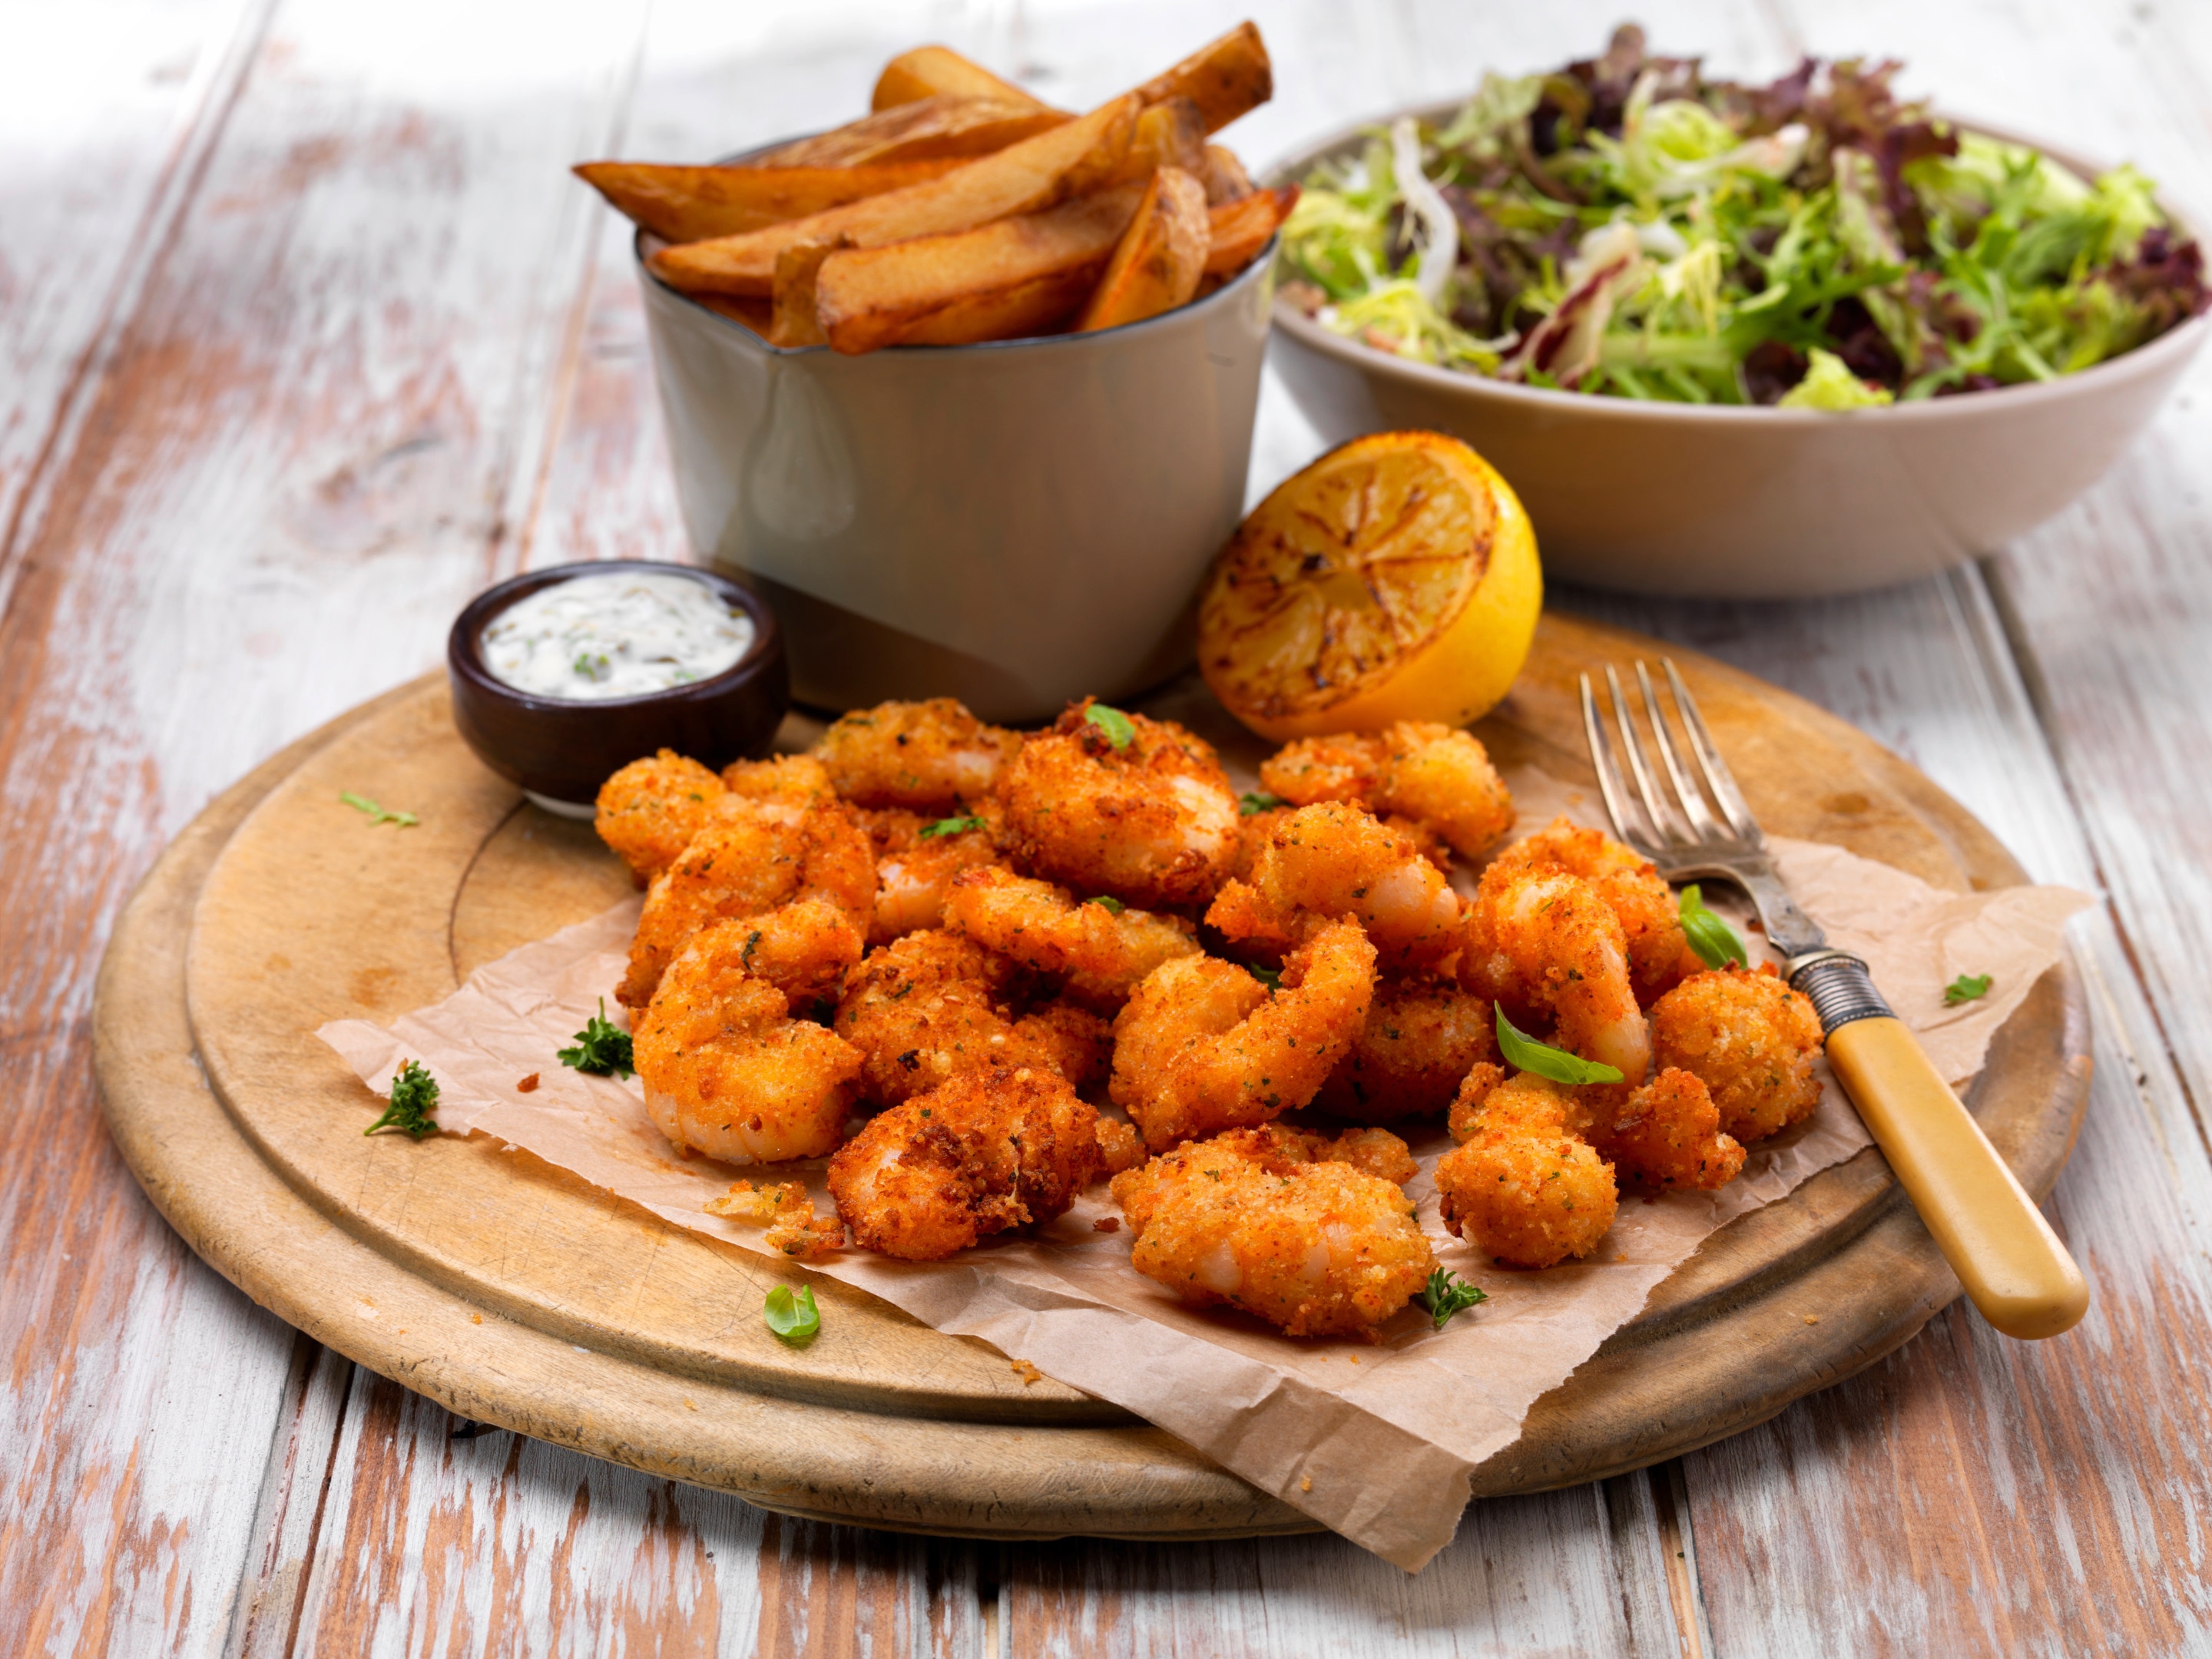 Breaded scampi on a serving board with chips, salad, lemon and dip